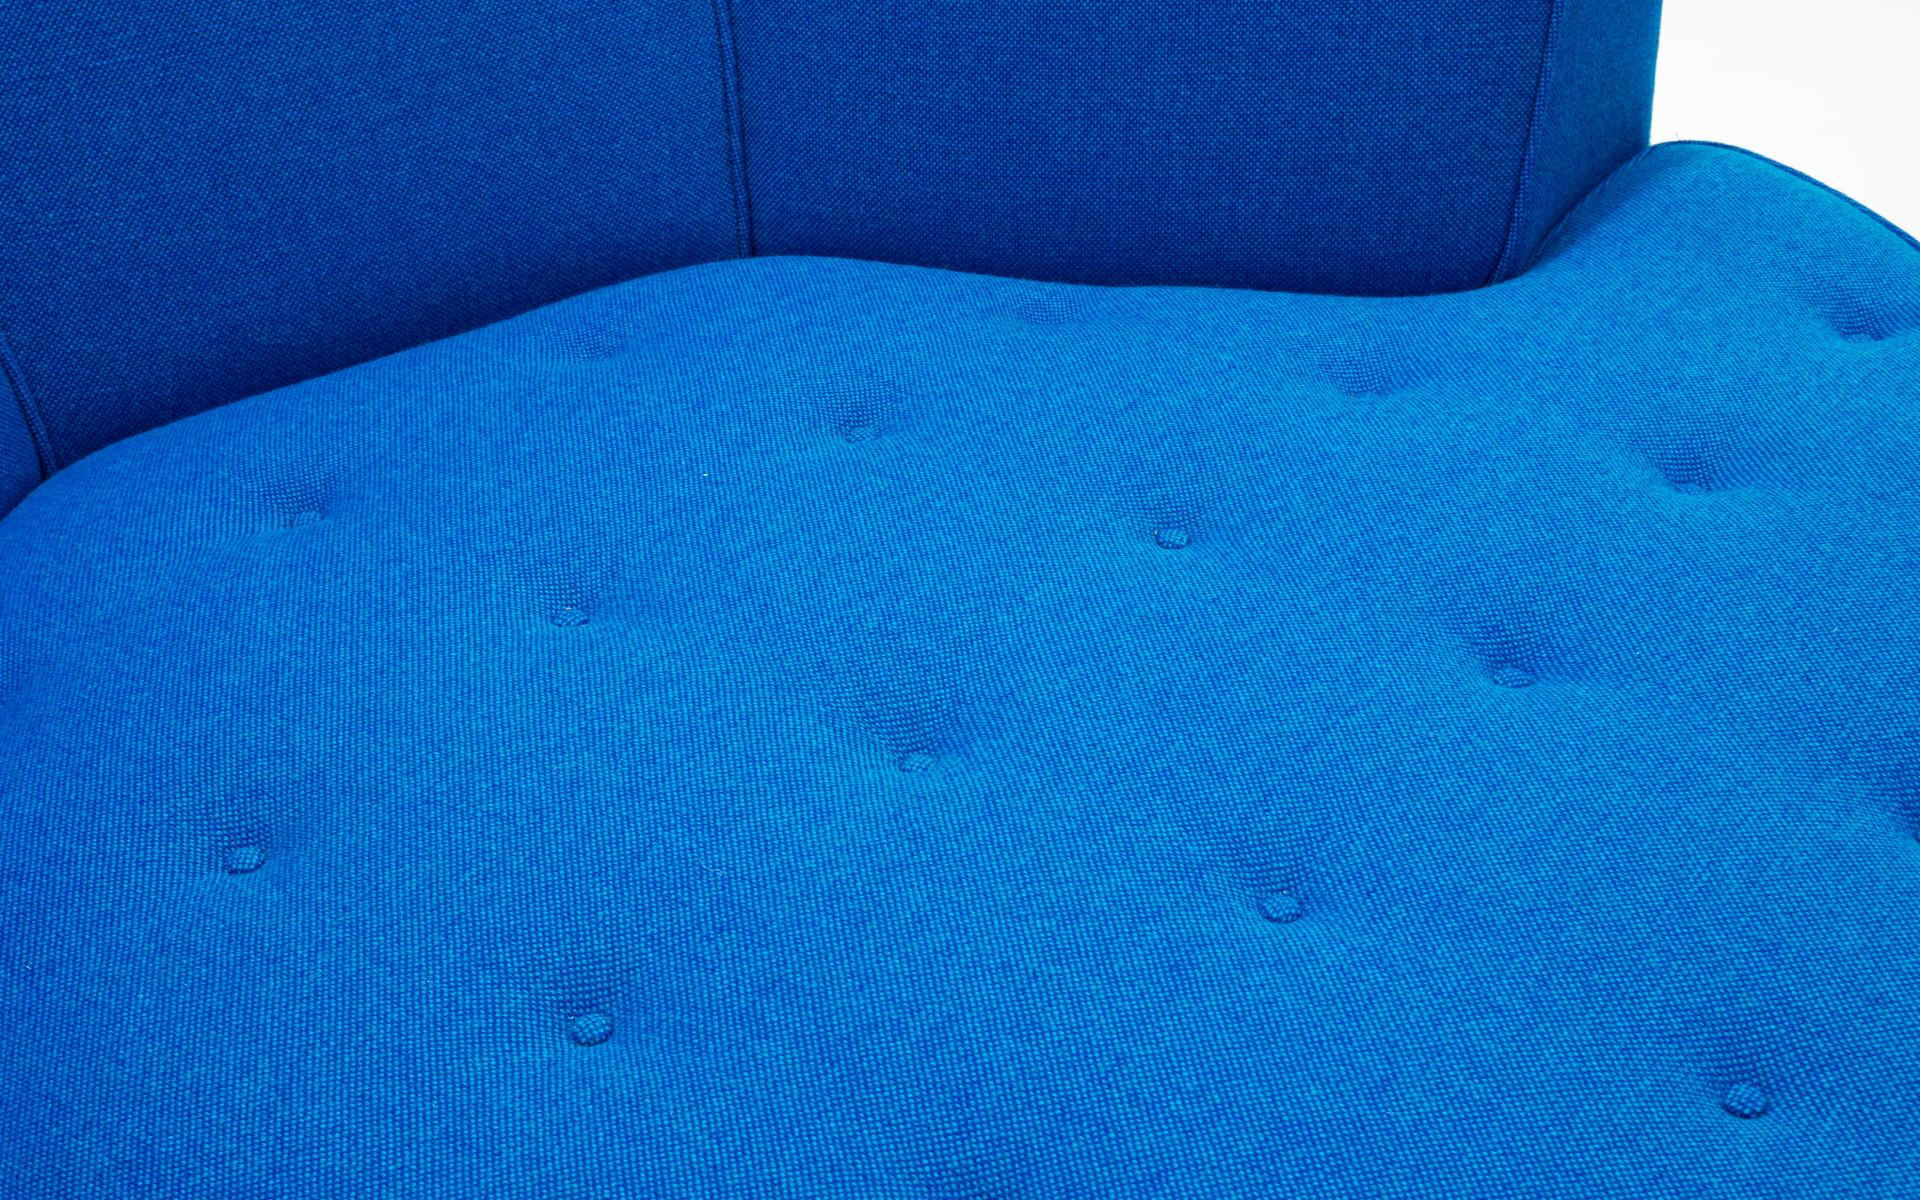 Mid-20th Century Octagonal Sofa Attributed to Harvey Probber, Restored in Blue Maharam Fabric For Sale